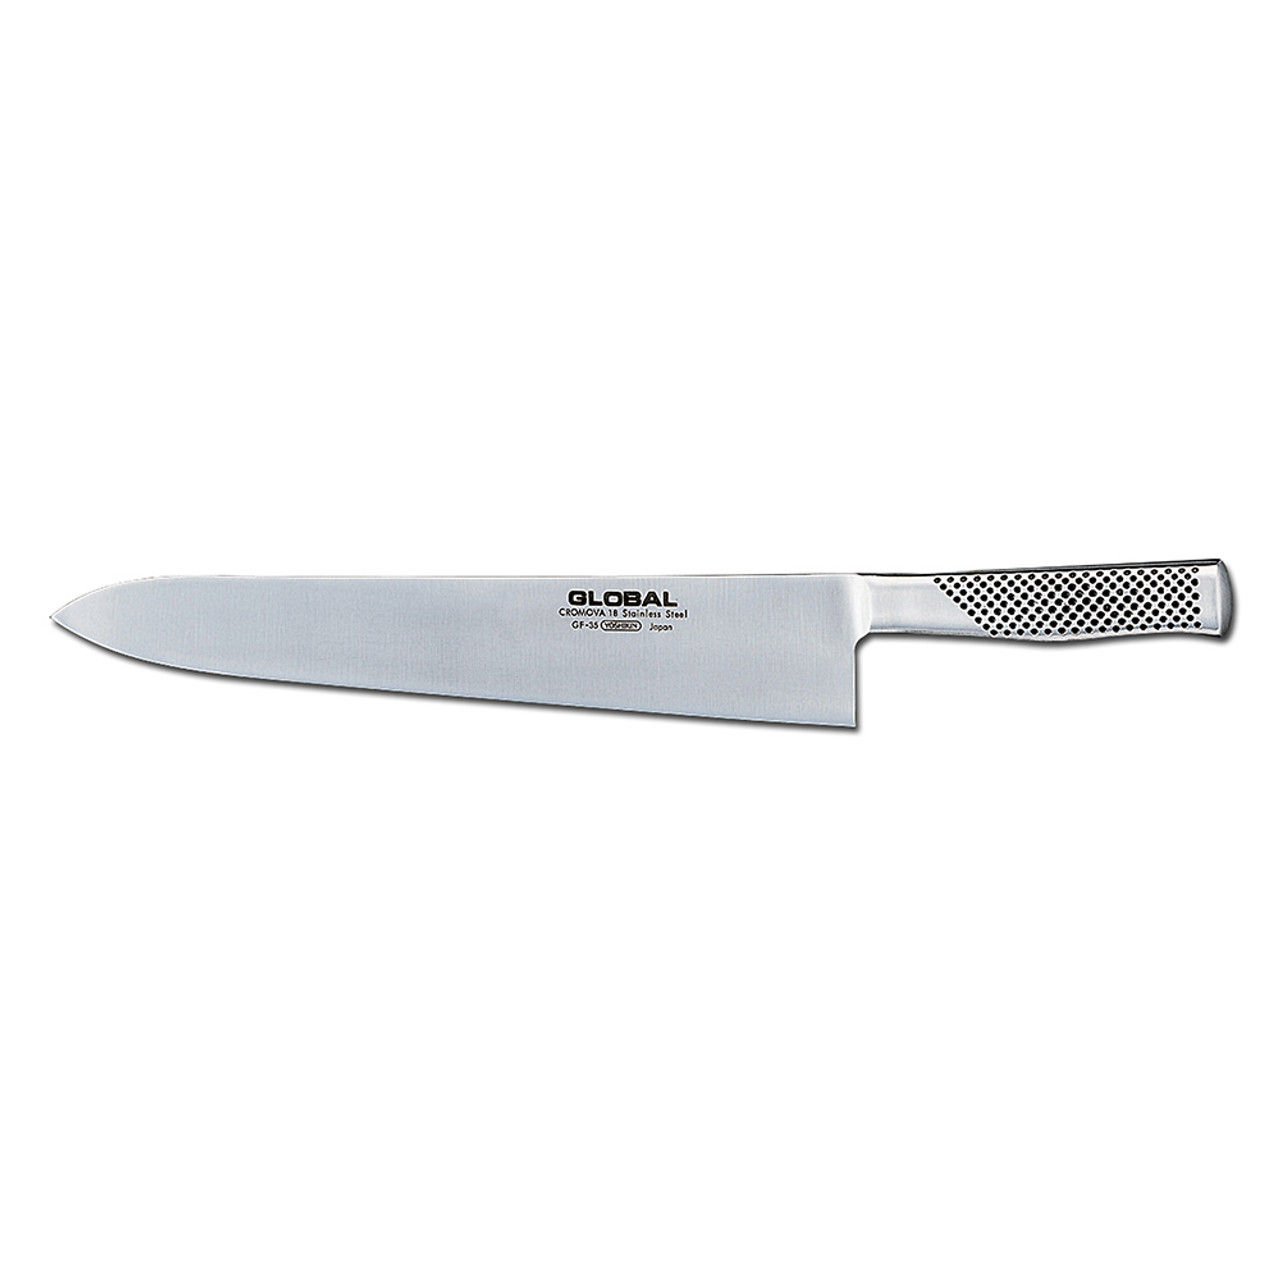 https://cdn11.bigcommerce.com/s-hccytny0od/images/stencil/1280x1280/products/311/4112/global-classic-heavyweight-chefs-knife-12-inch__33463.1587319023.jpg?c=2?imbypass=on